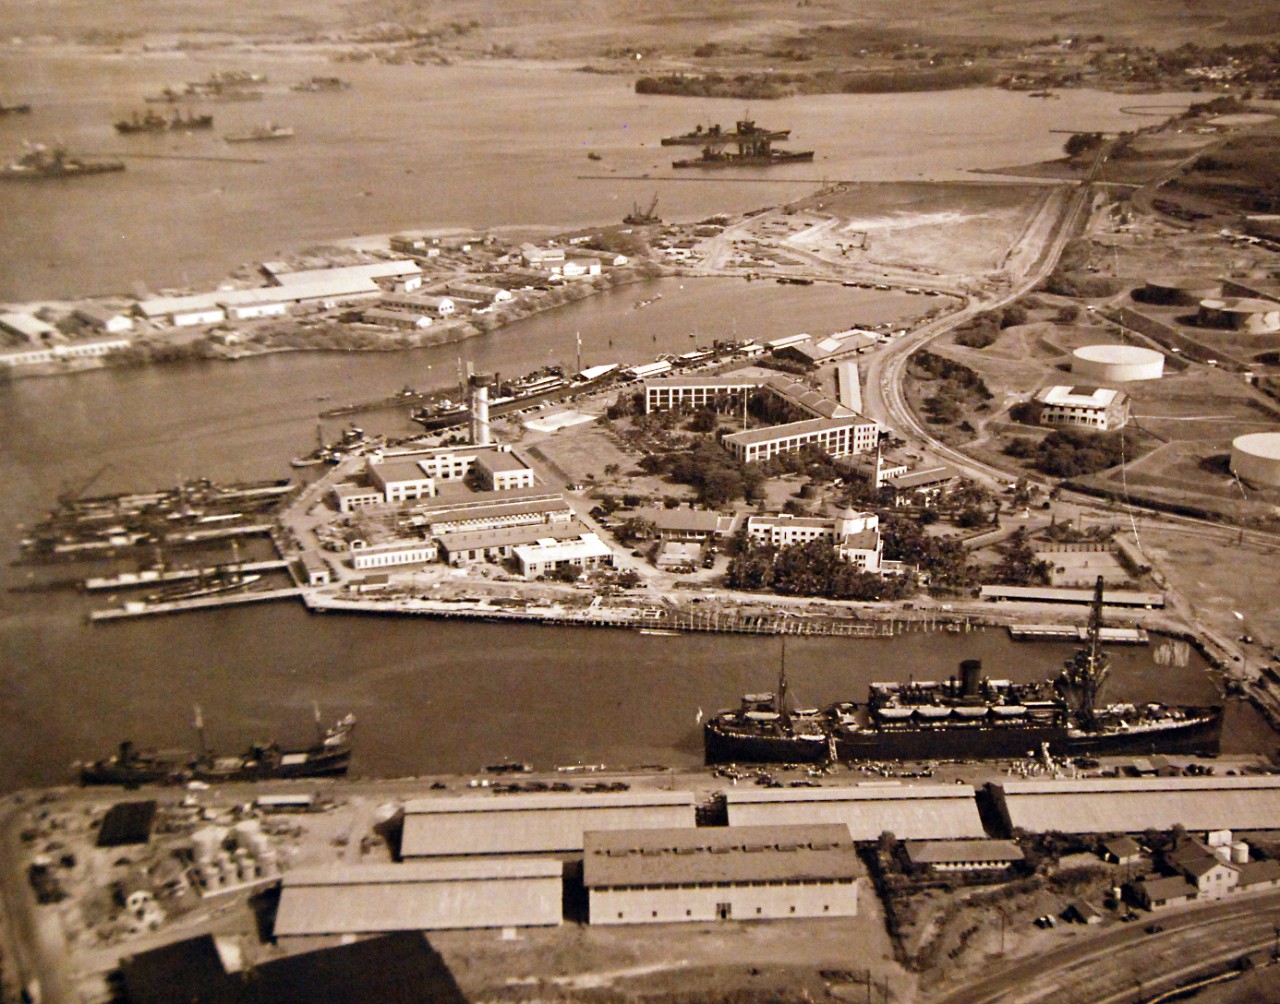 80-G-451125:   Pearl Harbor Navy Yard, Oahu, Territory of Hawaii, submarine base, looking north, October 13, 1941.   Official U.S. Navy photograph, now in the collections of the National Archives.  (2016/09/20).